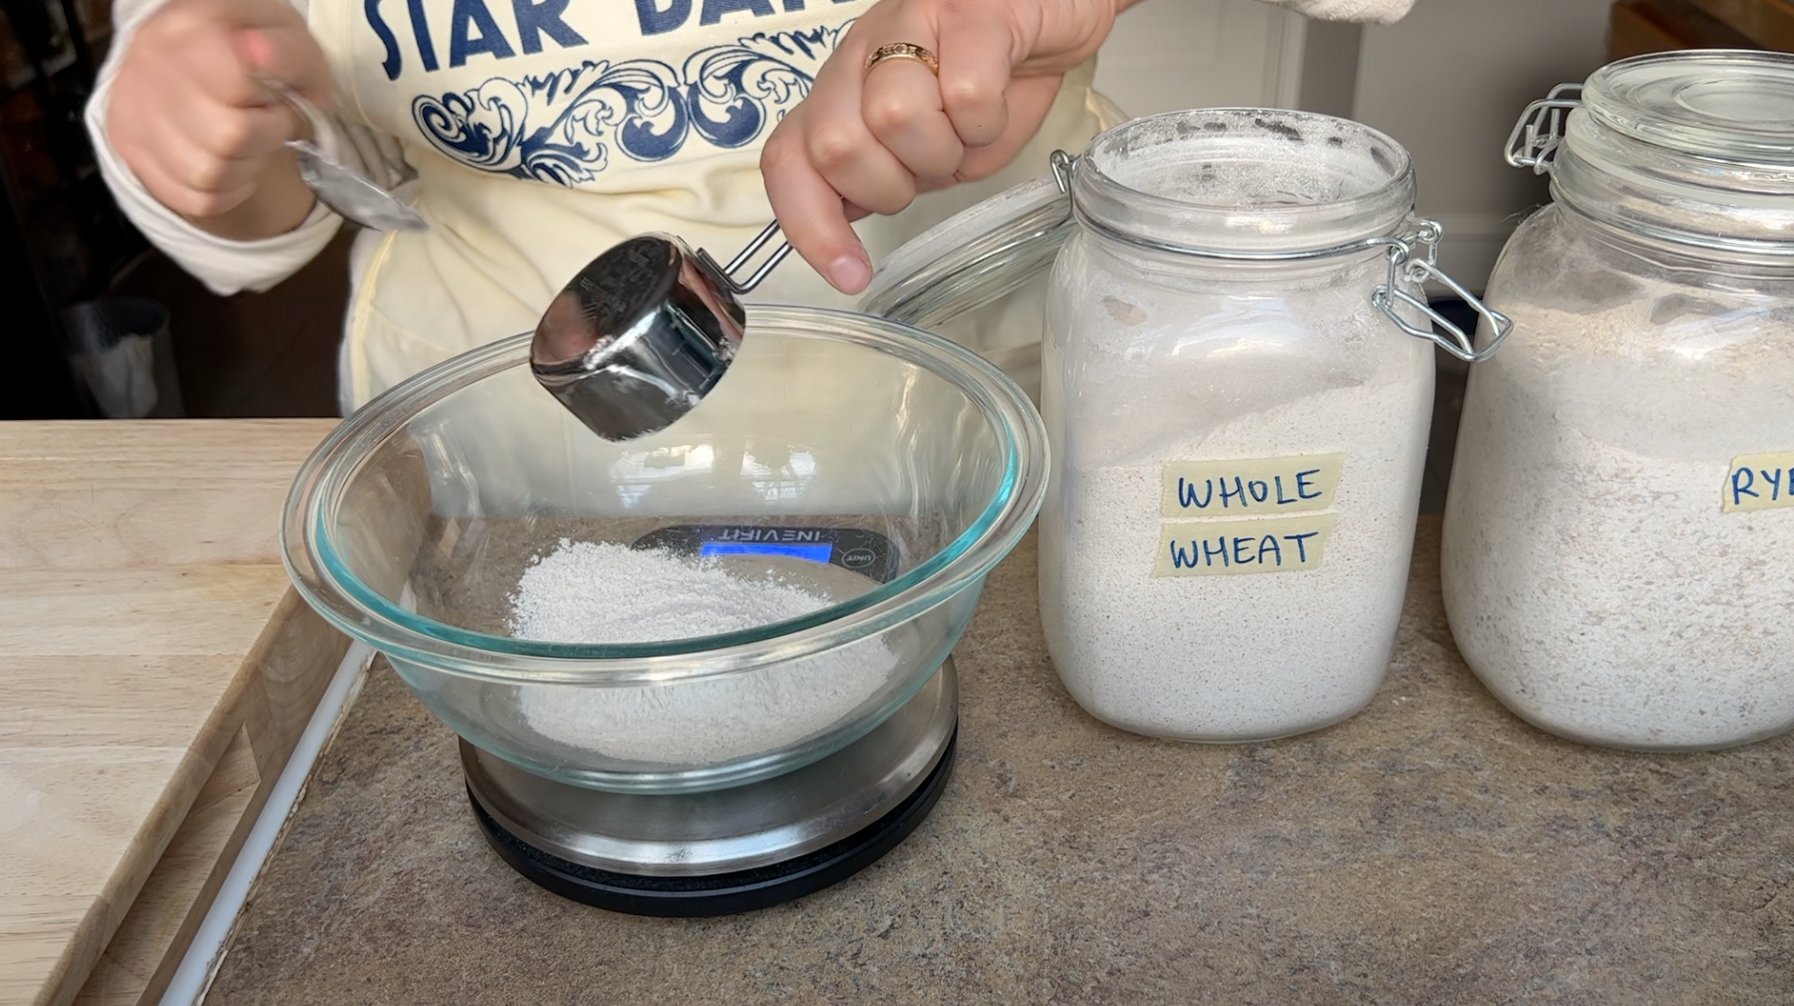 Measuring whole wheat flour into a bowl with a jar of rye flour almost off camera